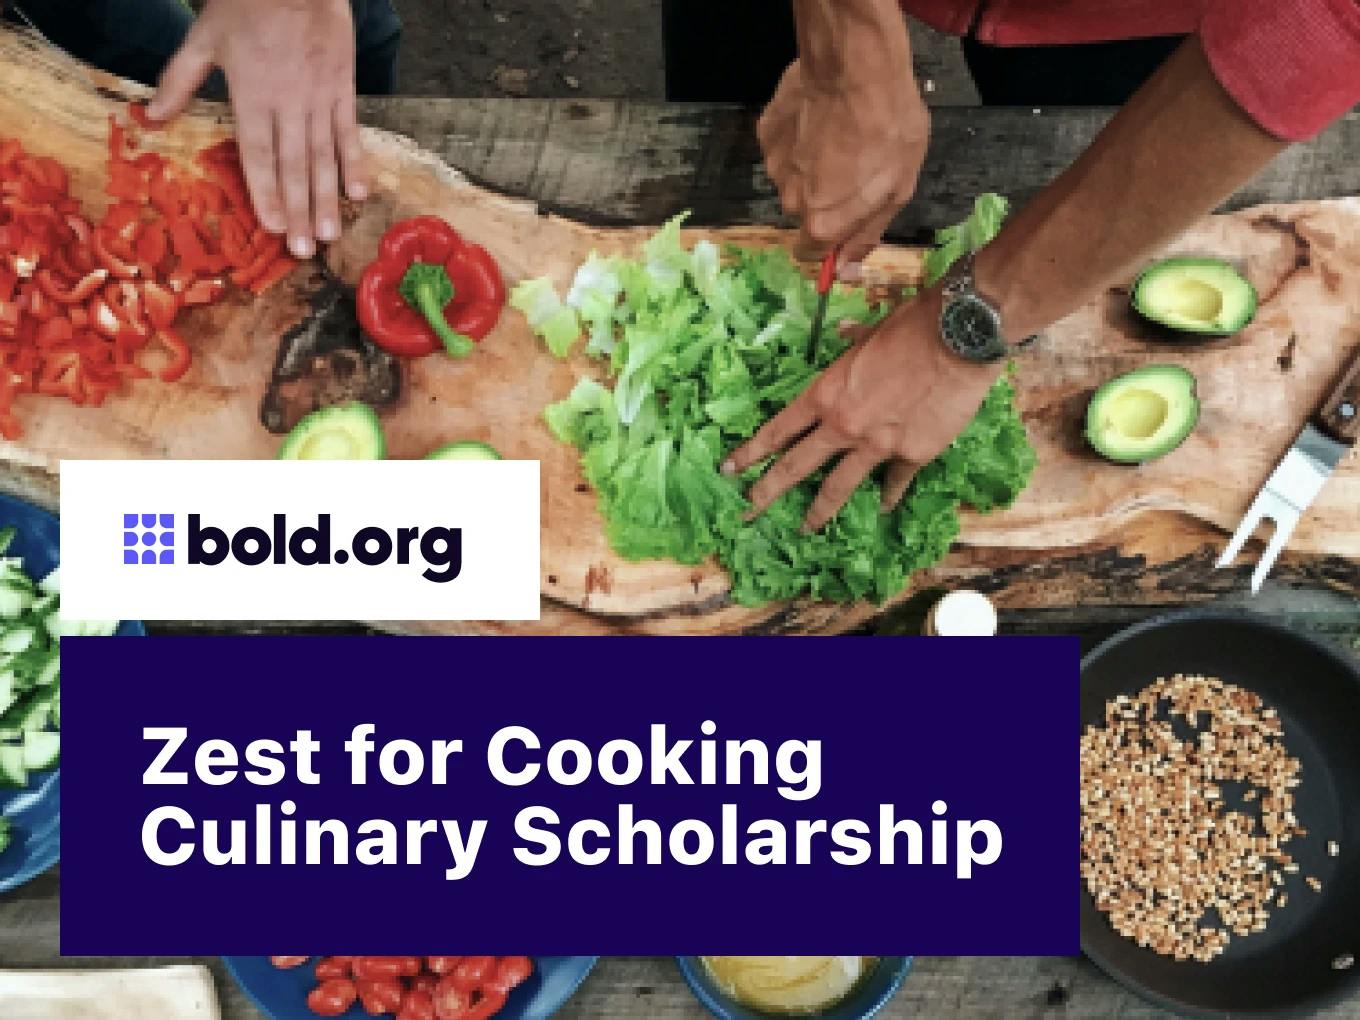 Zest for Cooking Culinary Scholarship